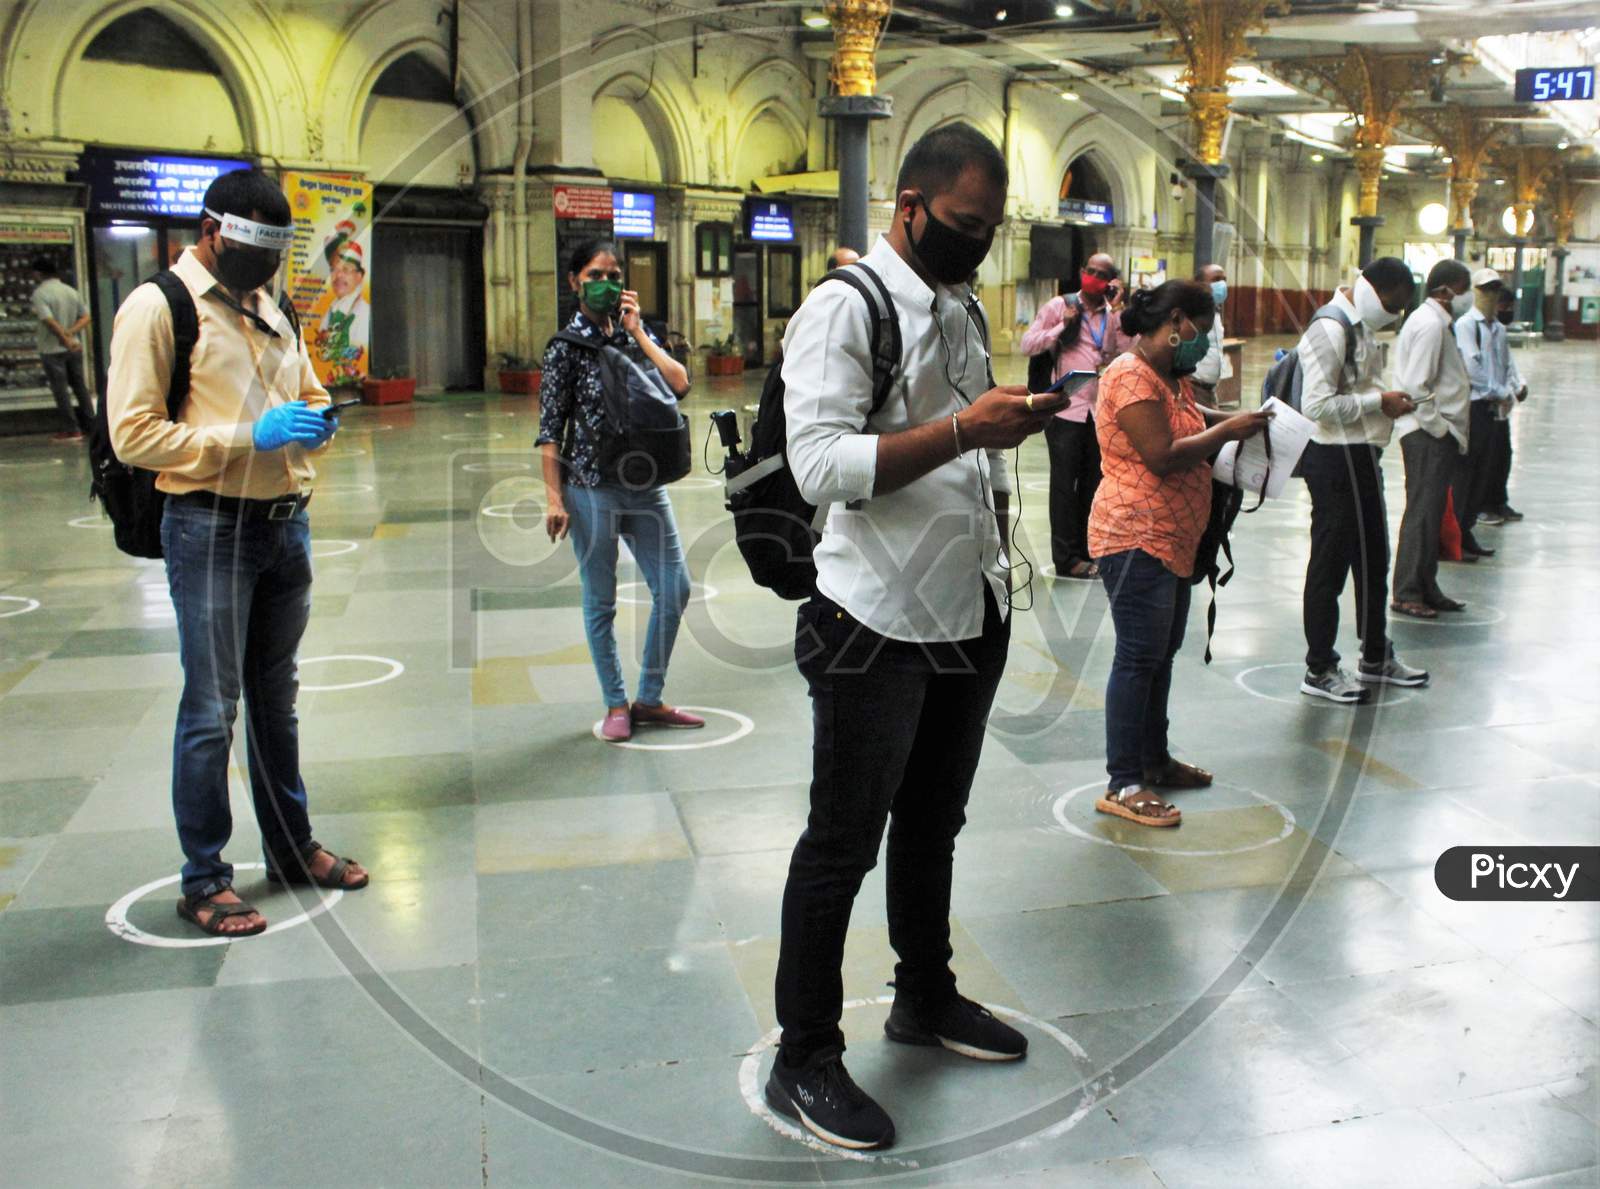 Commuters stand inside circles to maintain social distancing as they wait to board a train at a railway station after some restrictions were relaxed during the lockdown to slow the spread of the coronavirus disease (COVID-19) in Mumbai, India, June 22, 2020.